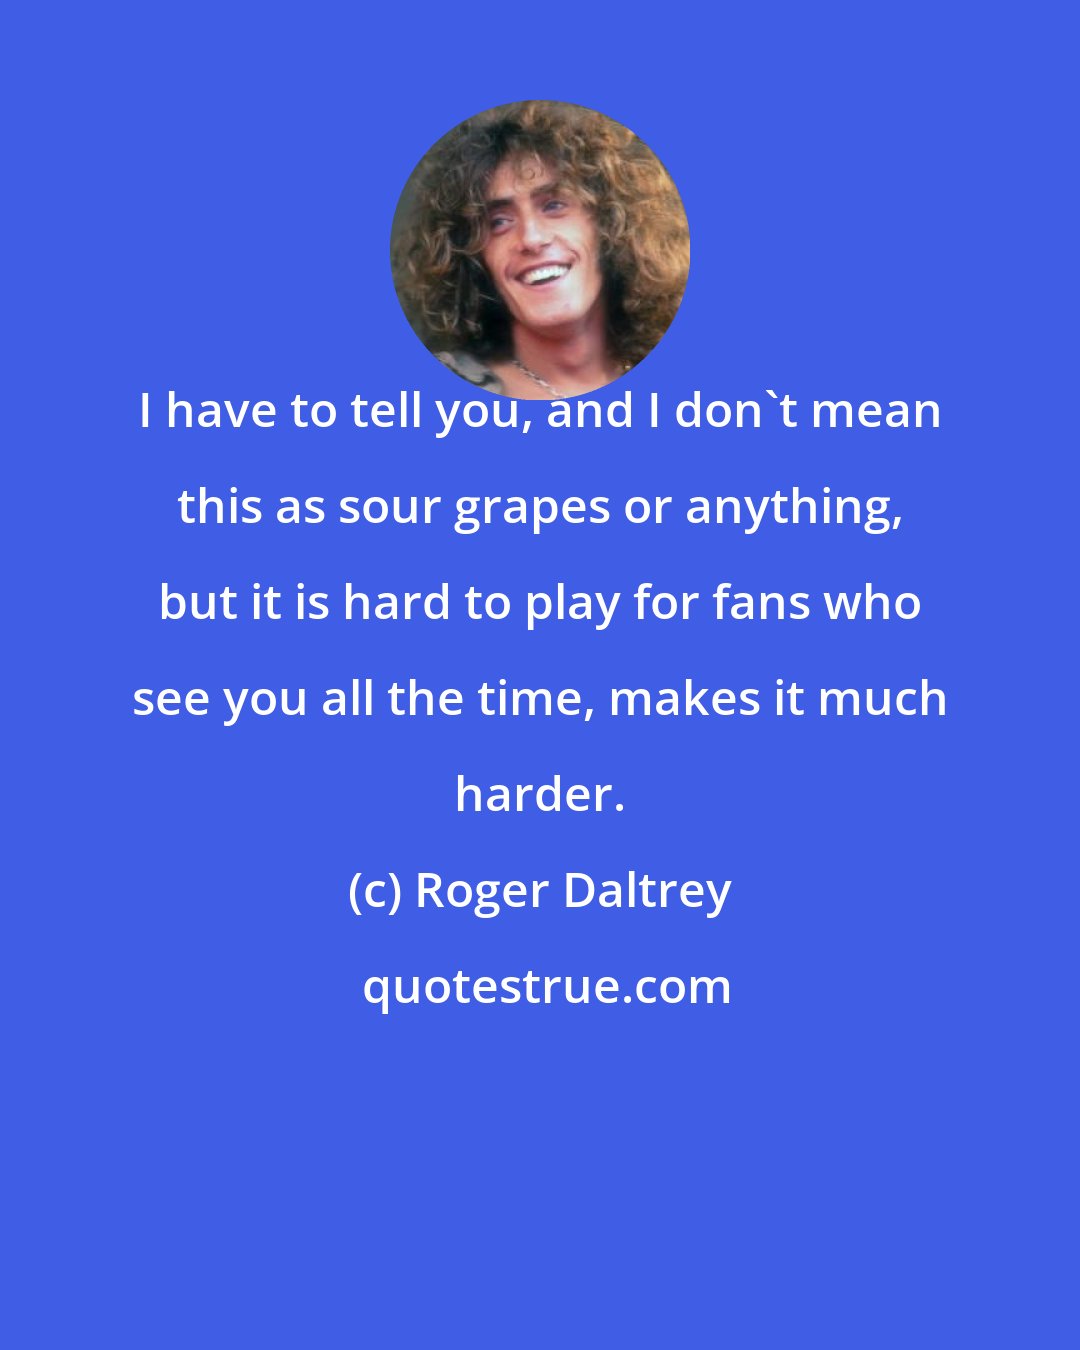 Roger Daltrey: I have to tell you, and I don't mean this as sour grapes or anything, but it is hard to play for fans who see you all the time, makes it much harder.